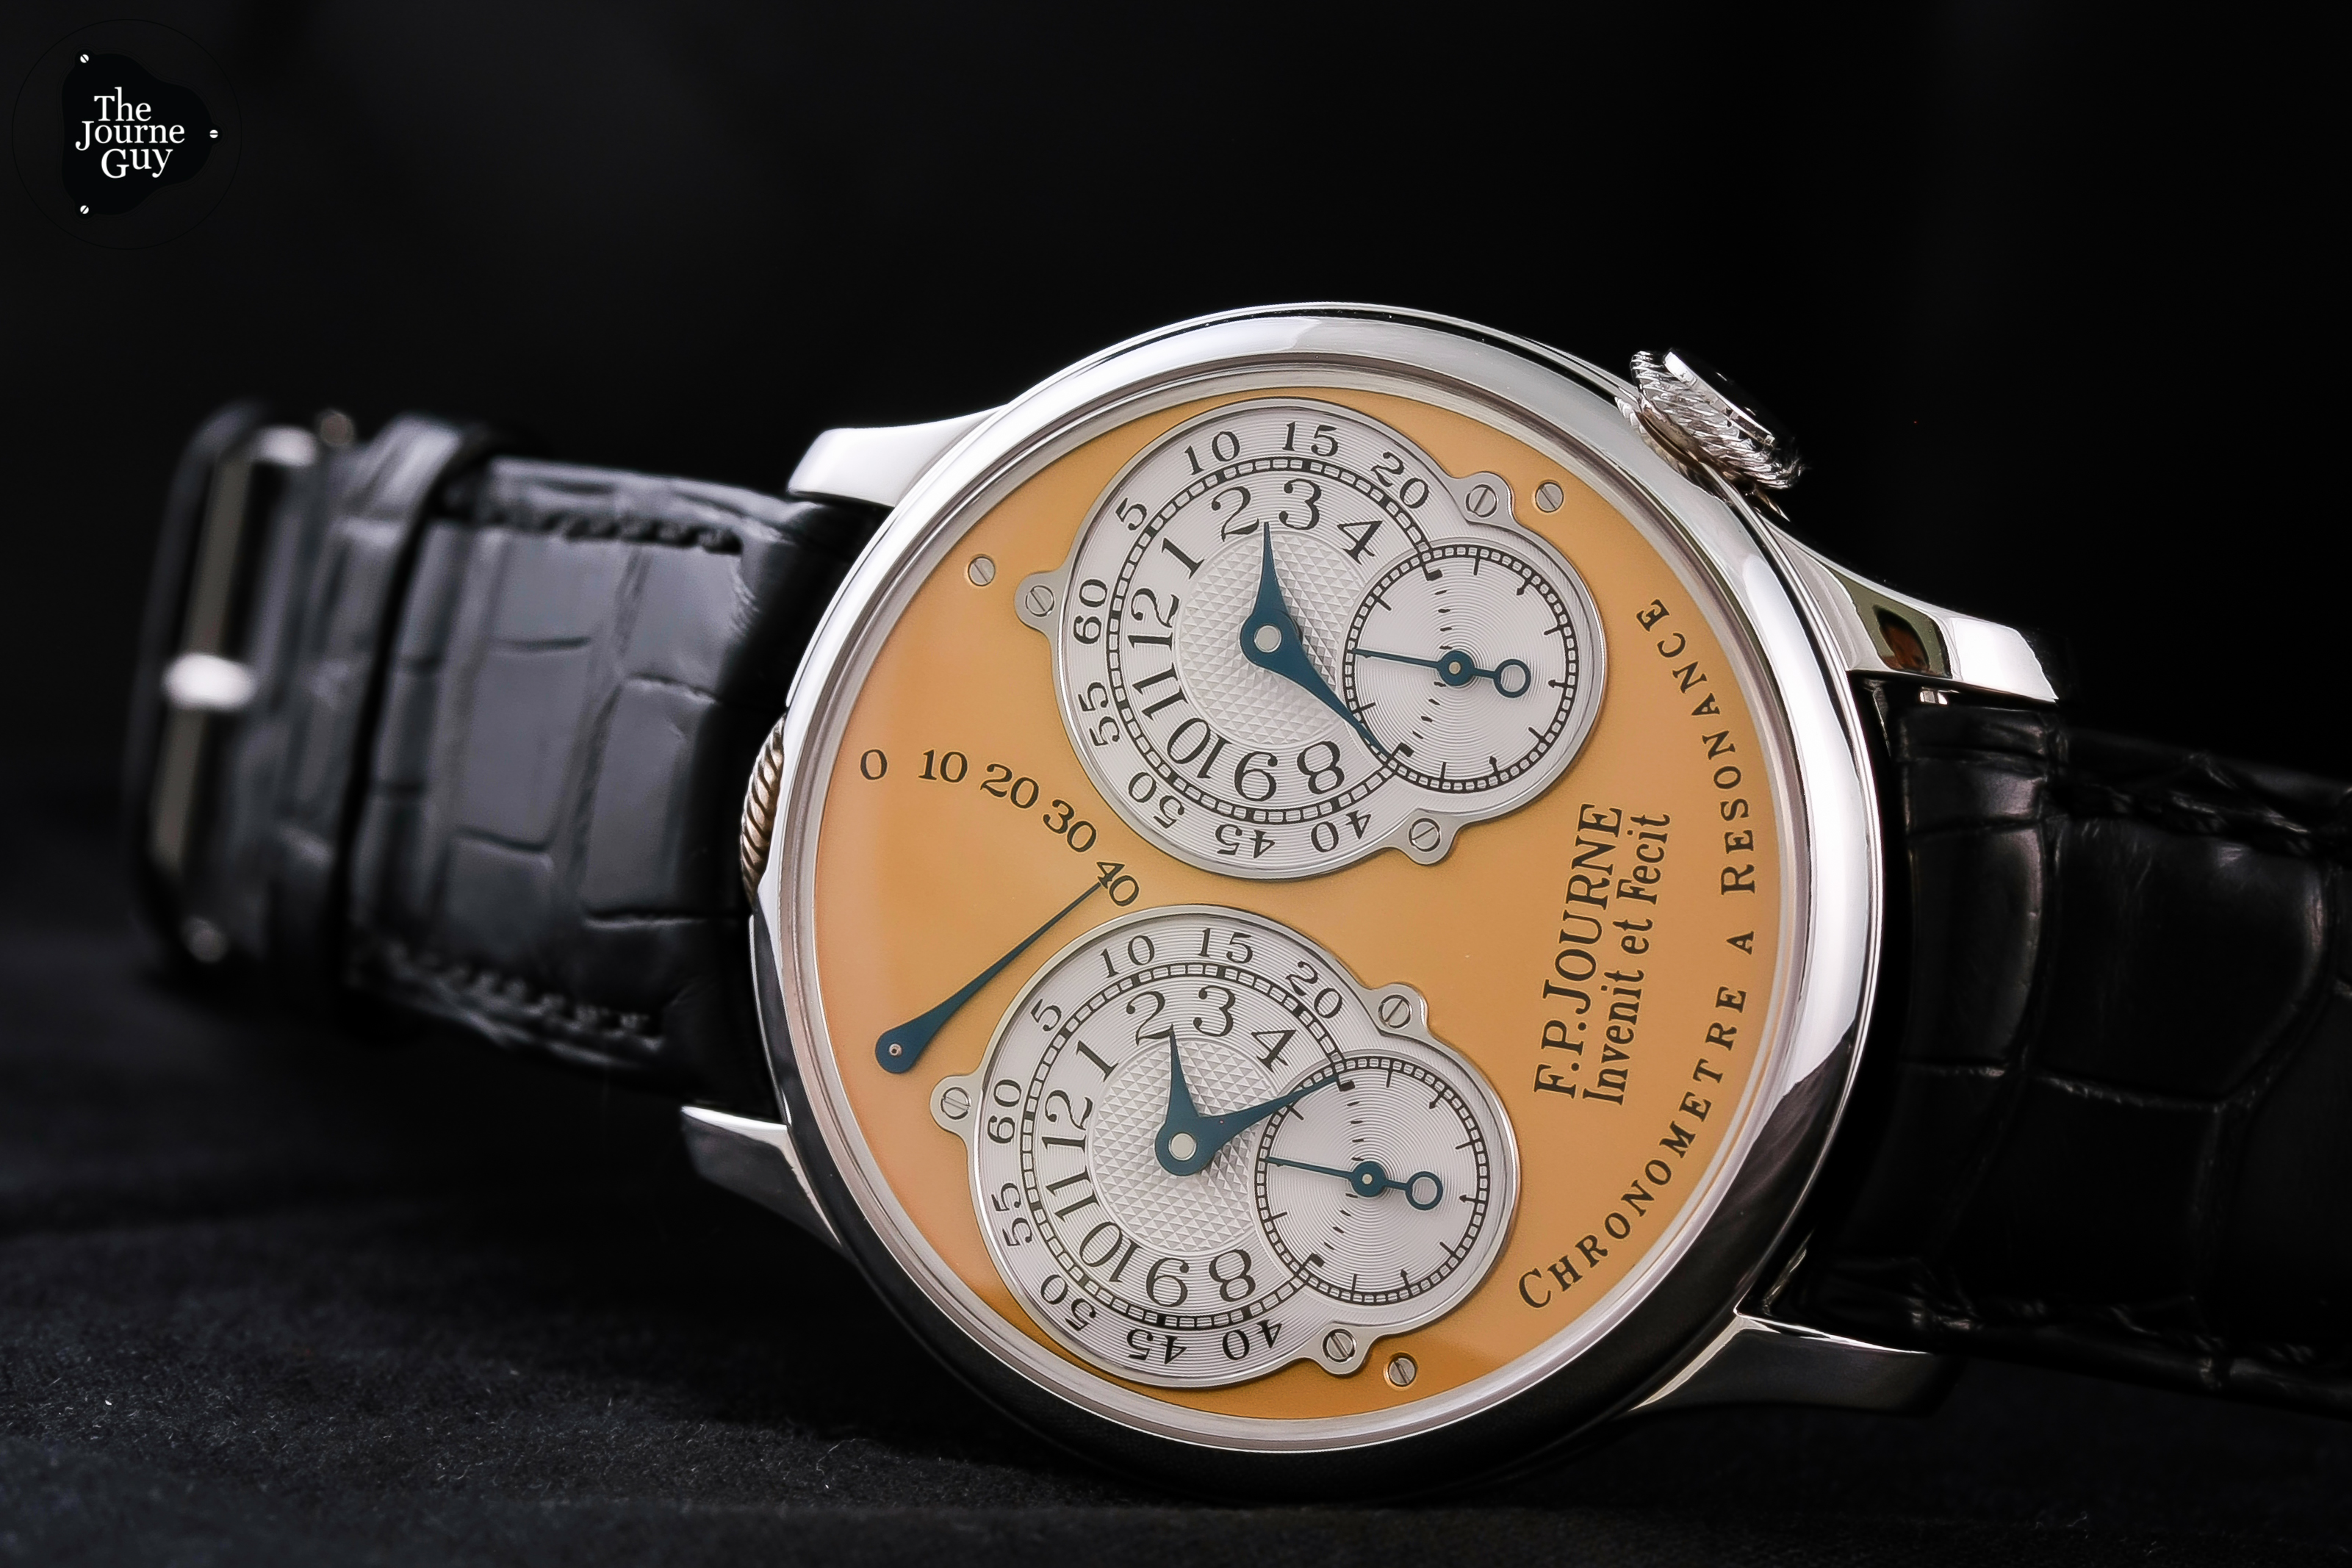 F.P. Journe Prototypes and the N°000 Resonance